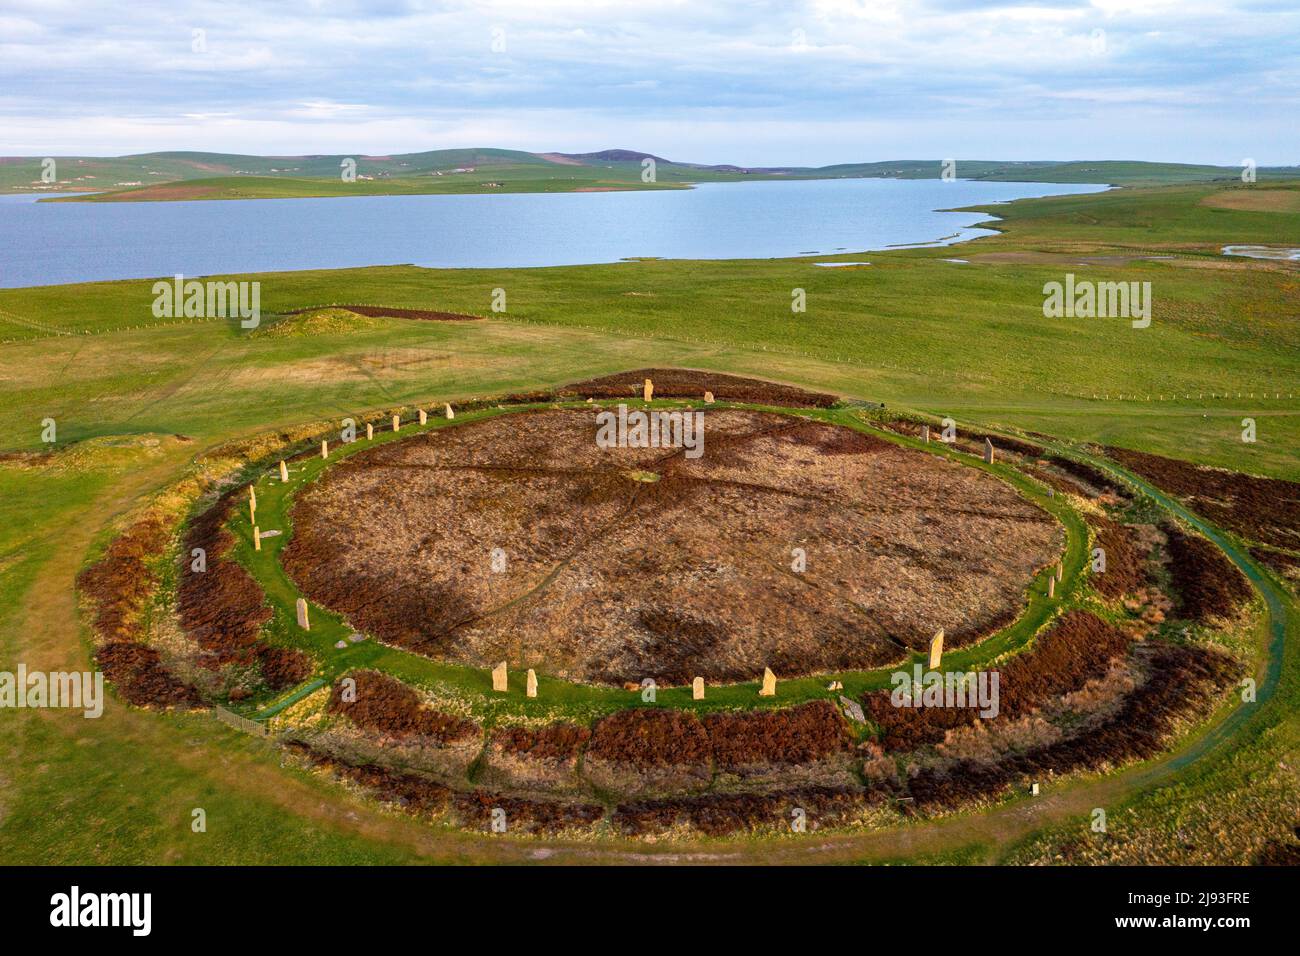 Aerial view of the Ring of Brodgar Neolithic stone circle, Orkney Islands, Scotland. Stock Photo